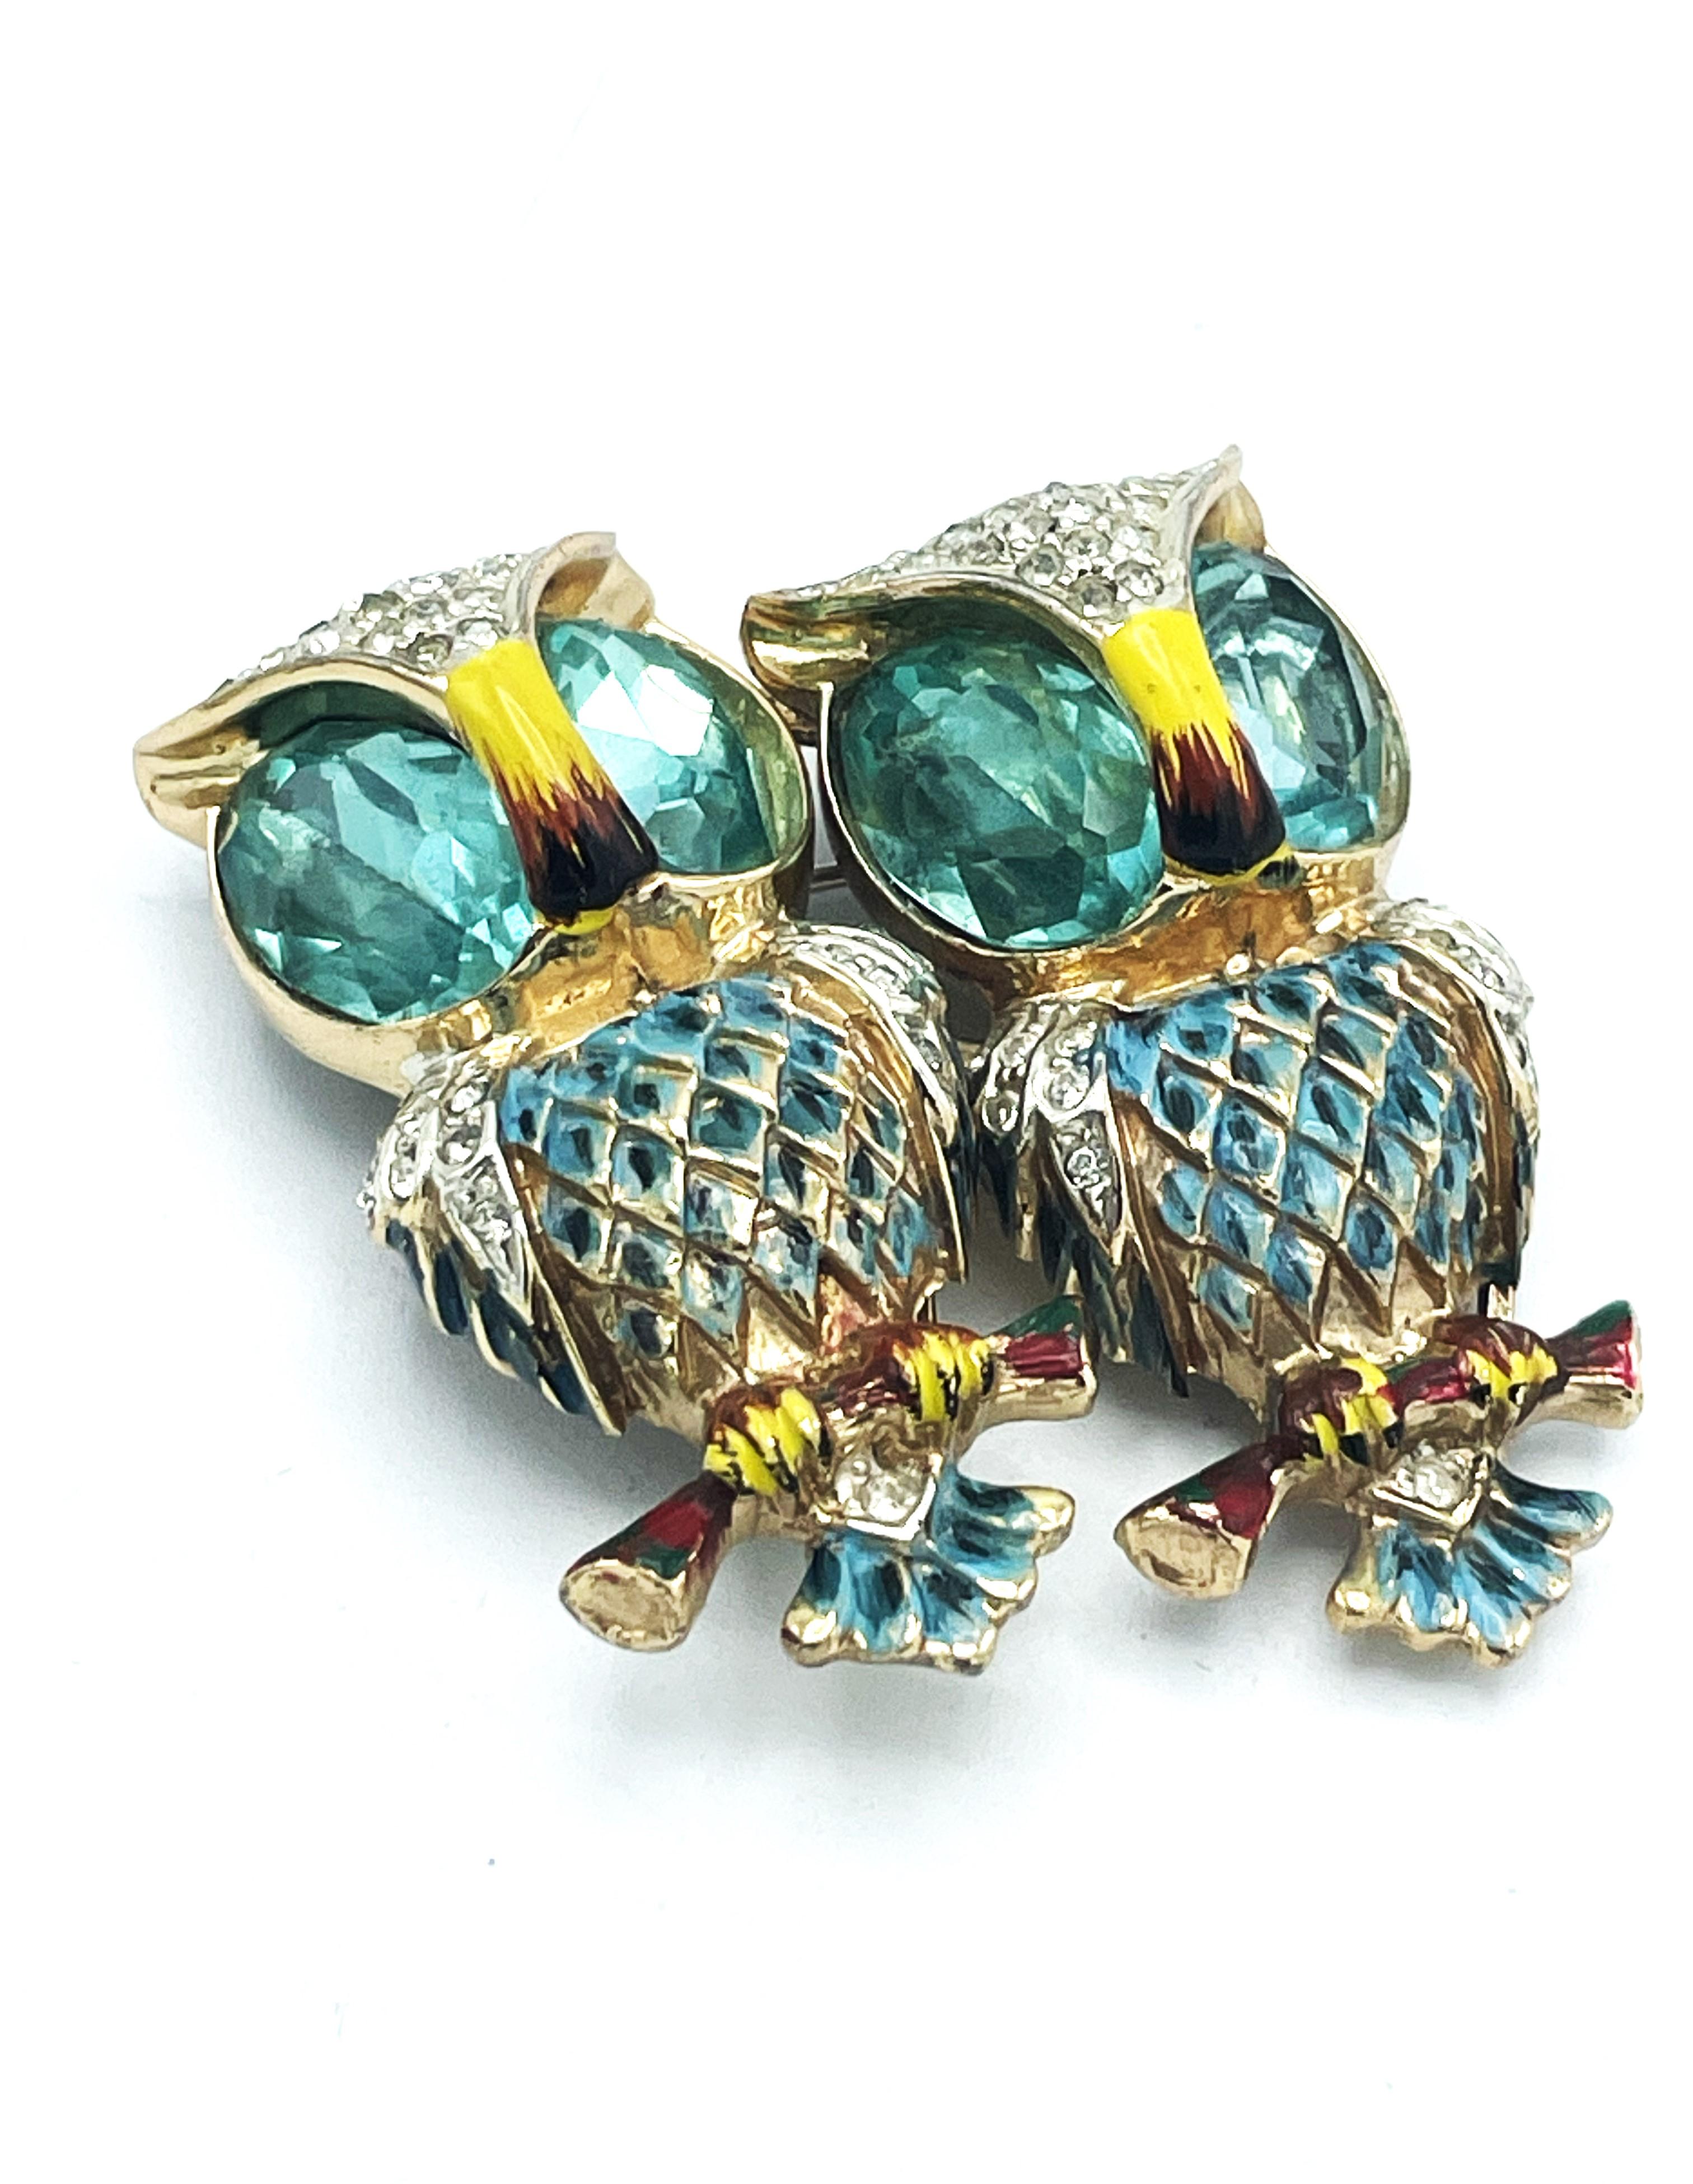 Women's CORO DUETT OWL BROOCH, dating 1944 Sterling Silver, USA aquamarines and enamel  For Sale